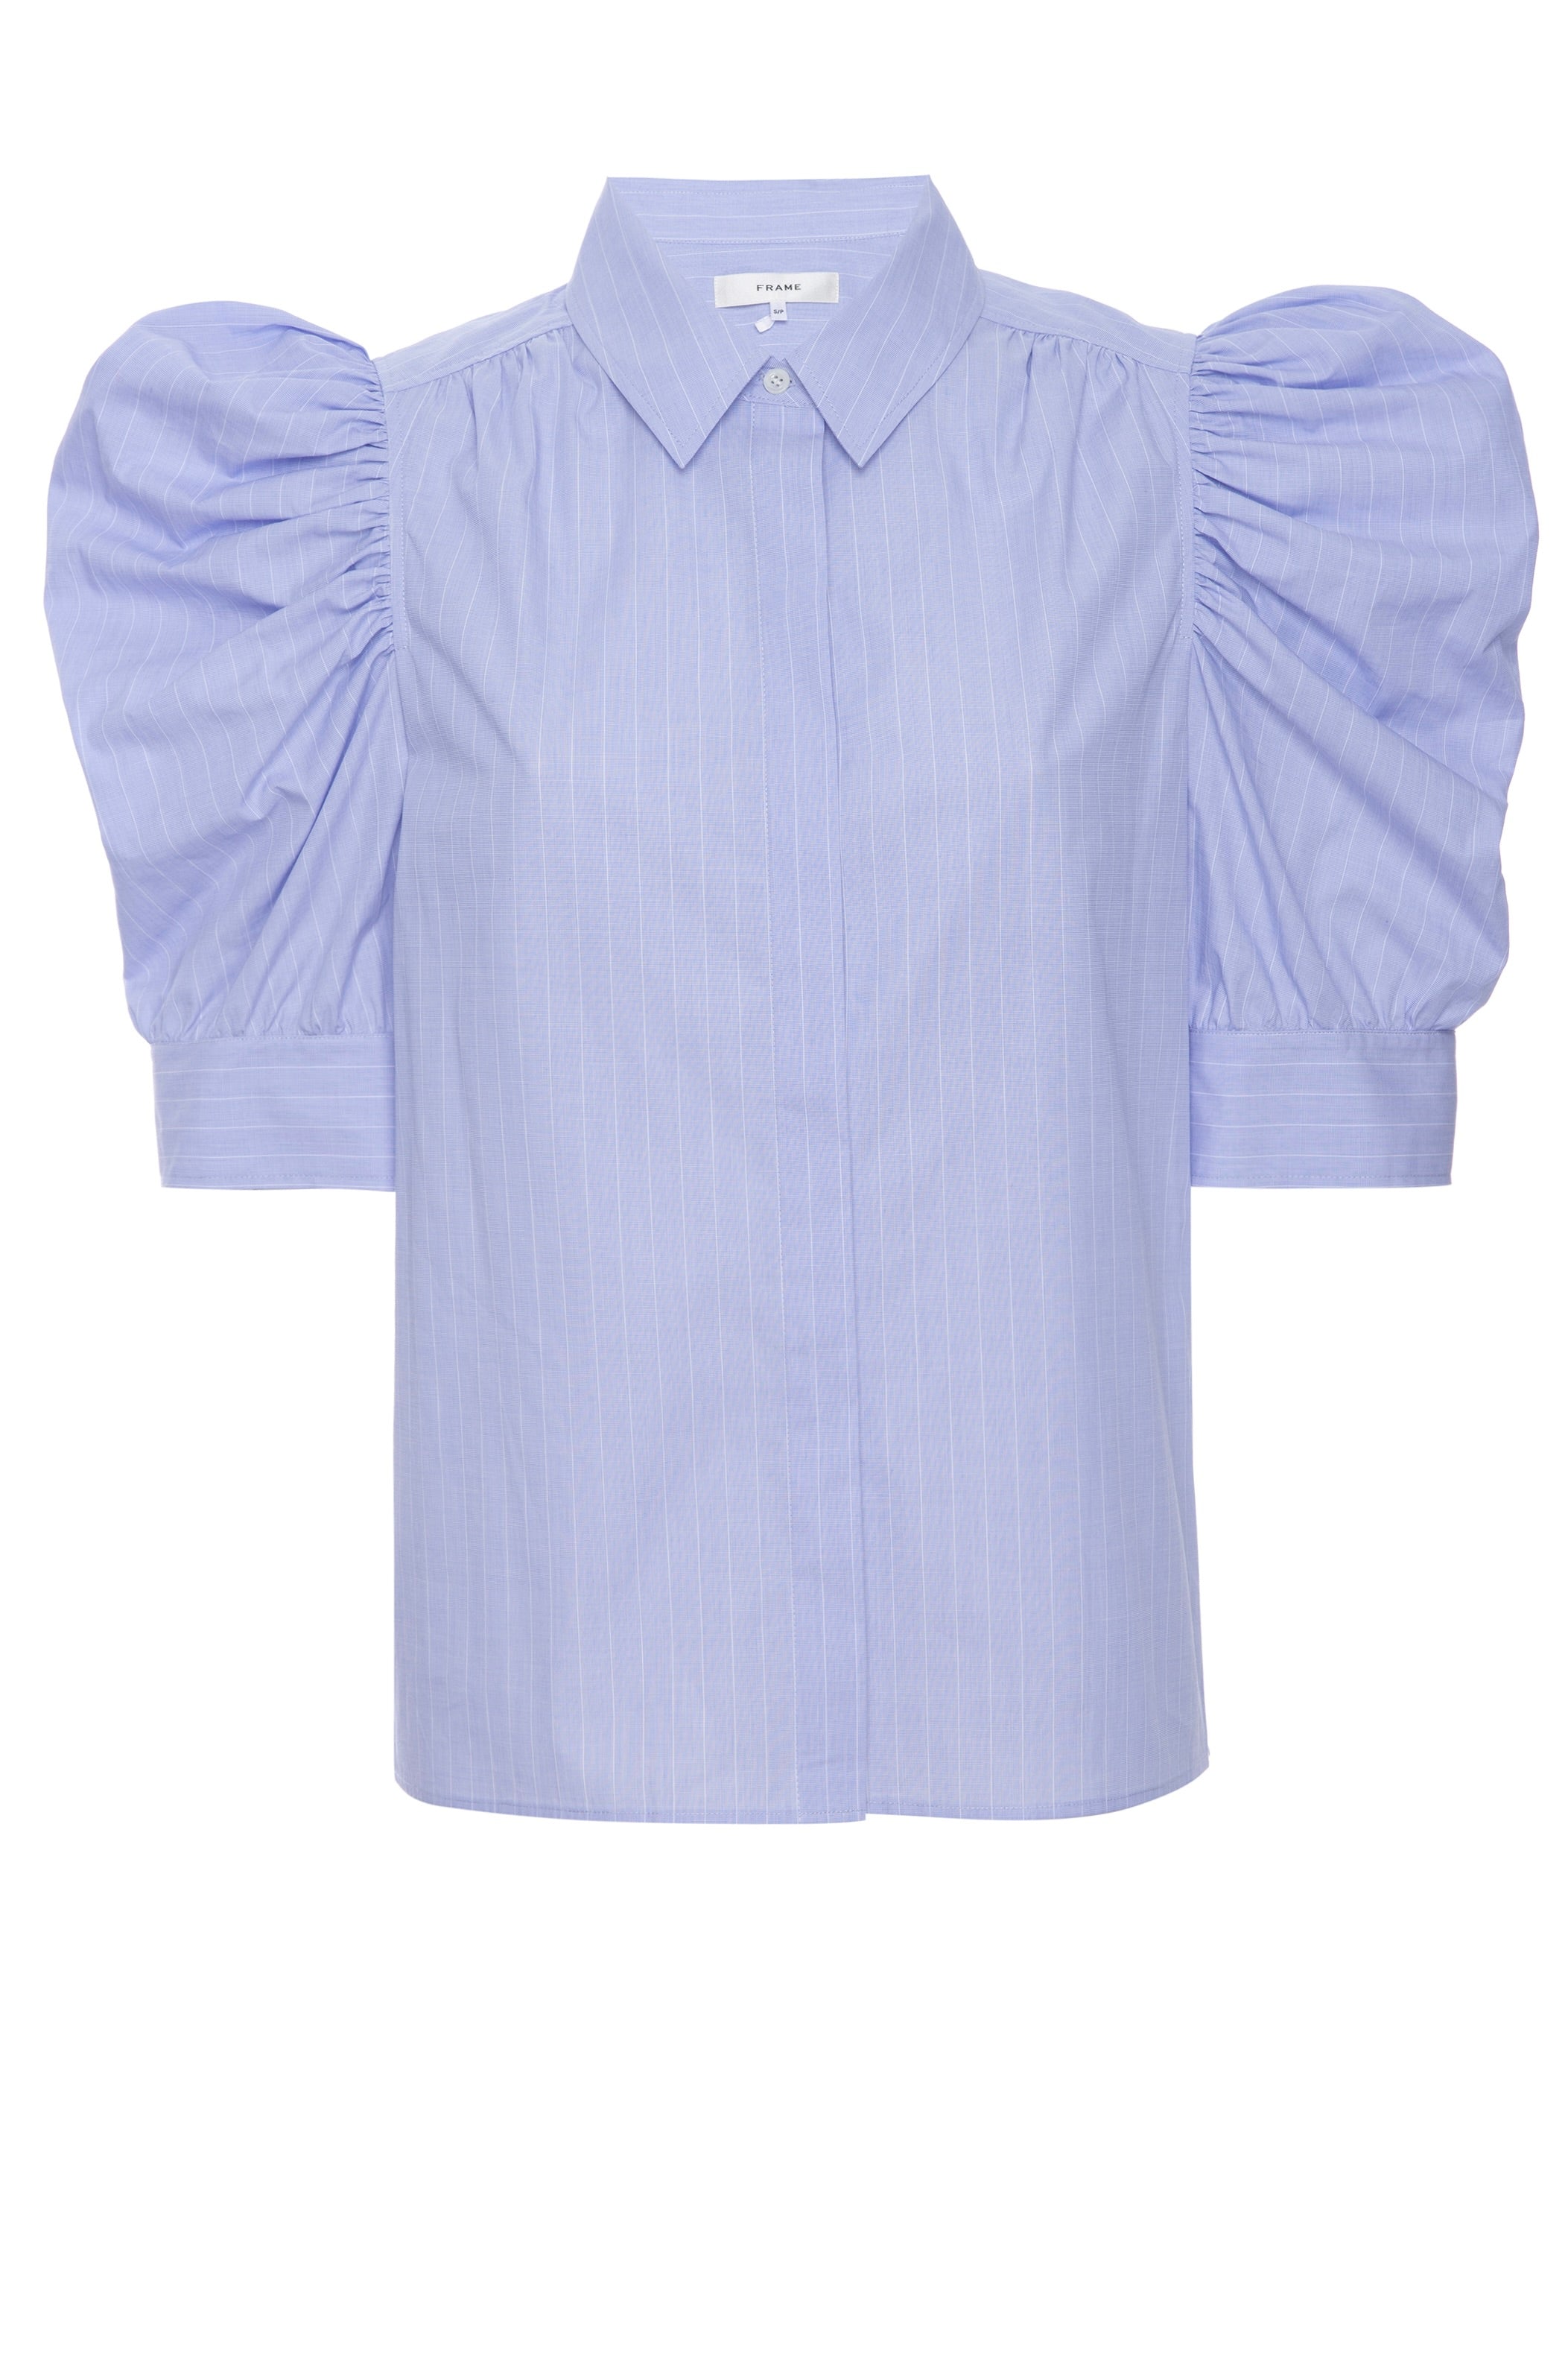 ruched puff sleeve top - chambray blue stripe